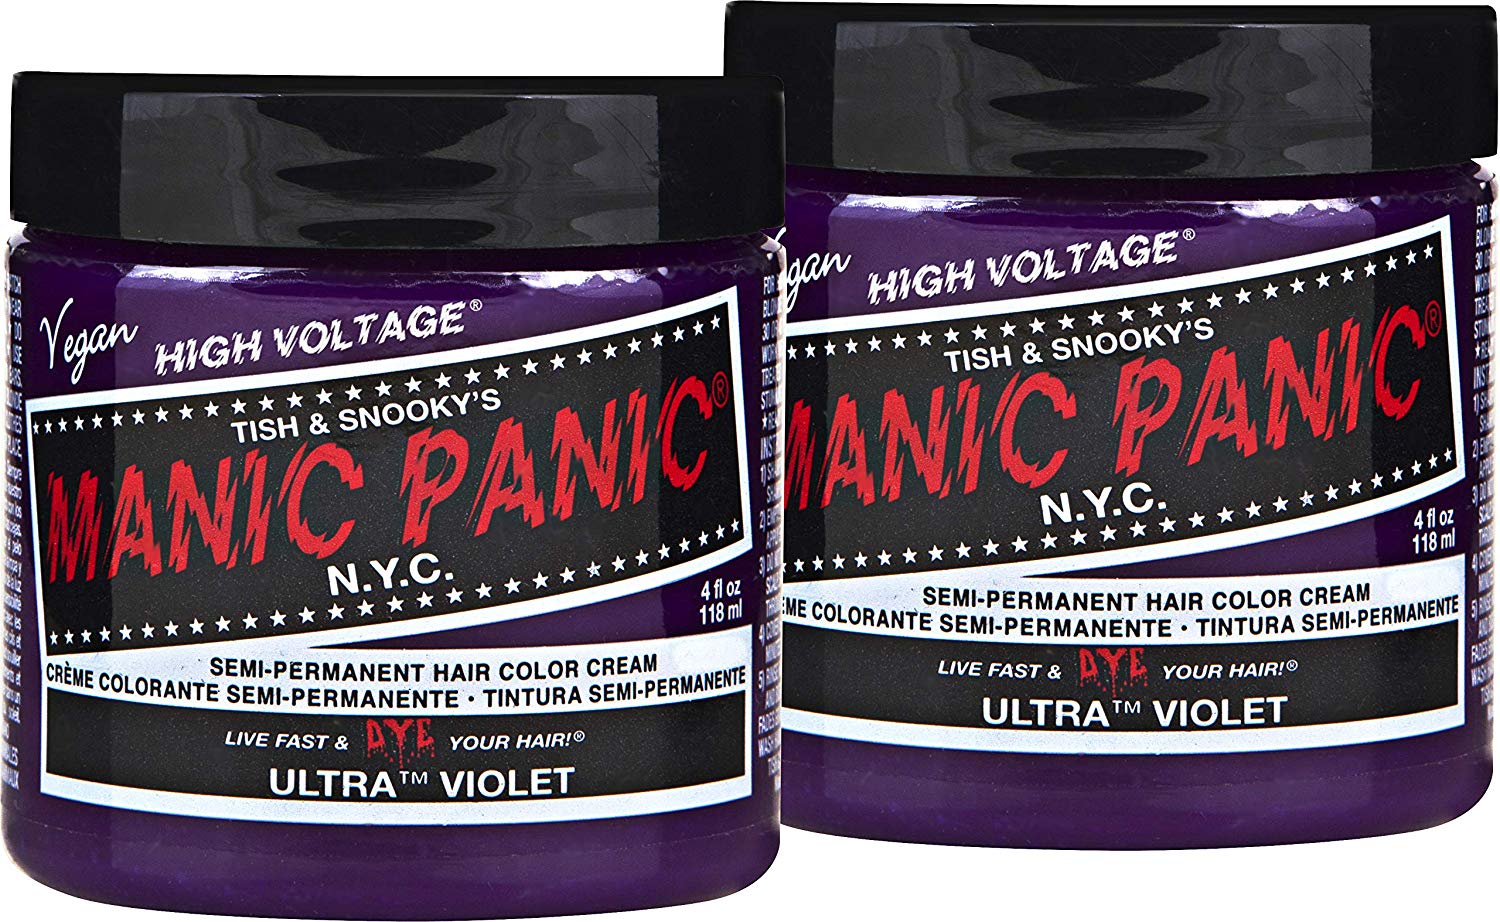 3. "The Best Purple Hair Dyes for Blonde Hair" - wide 9